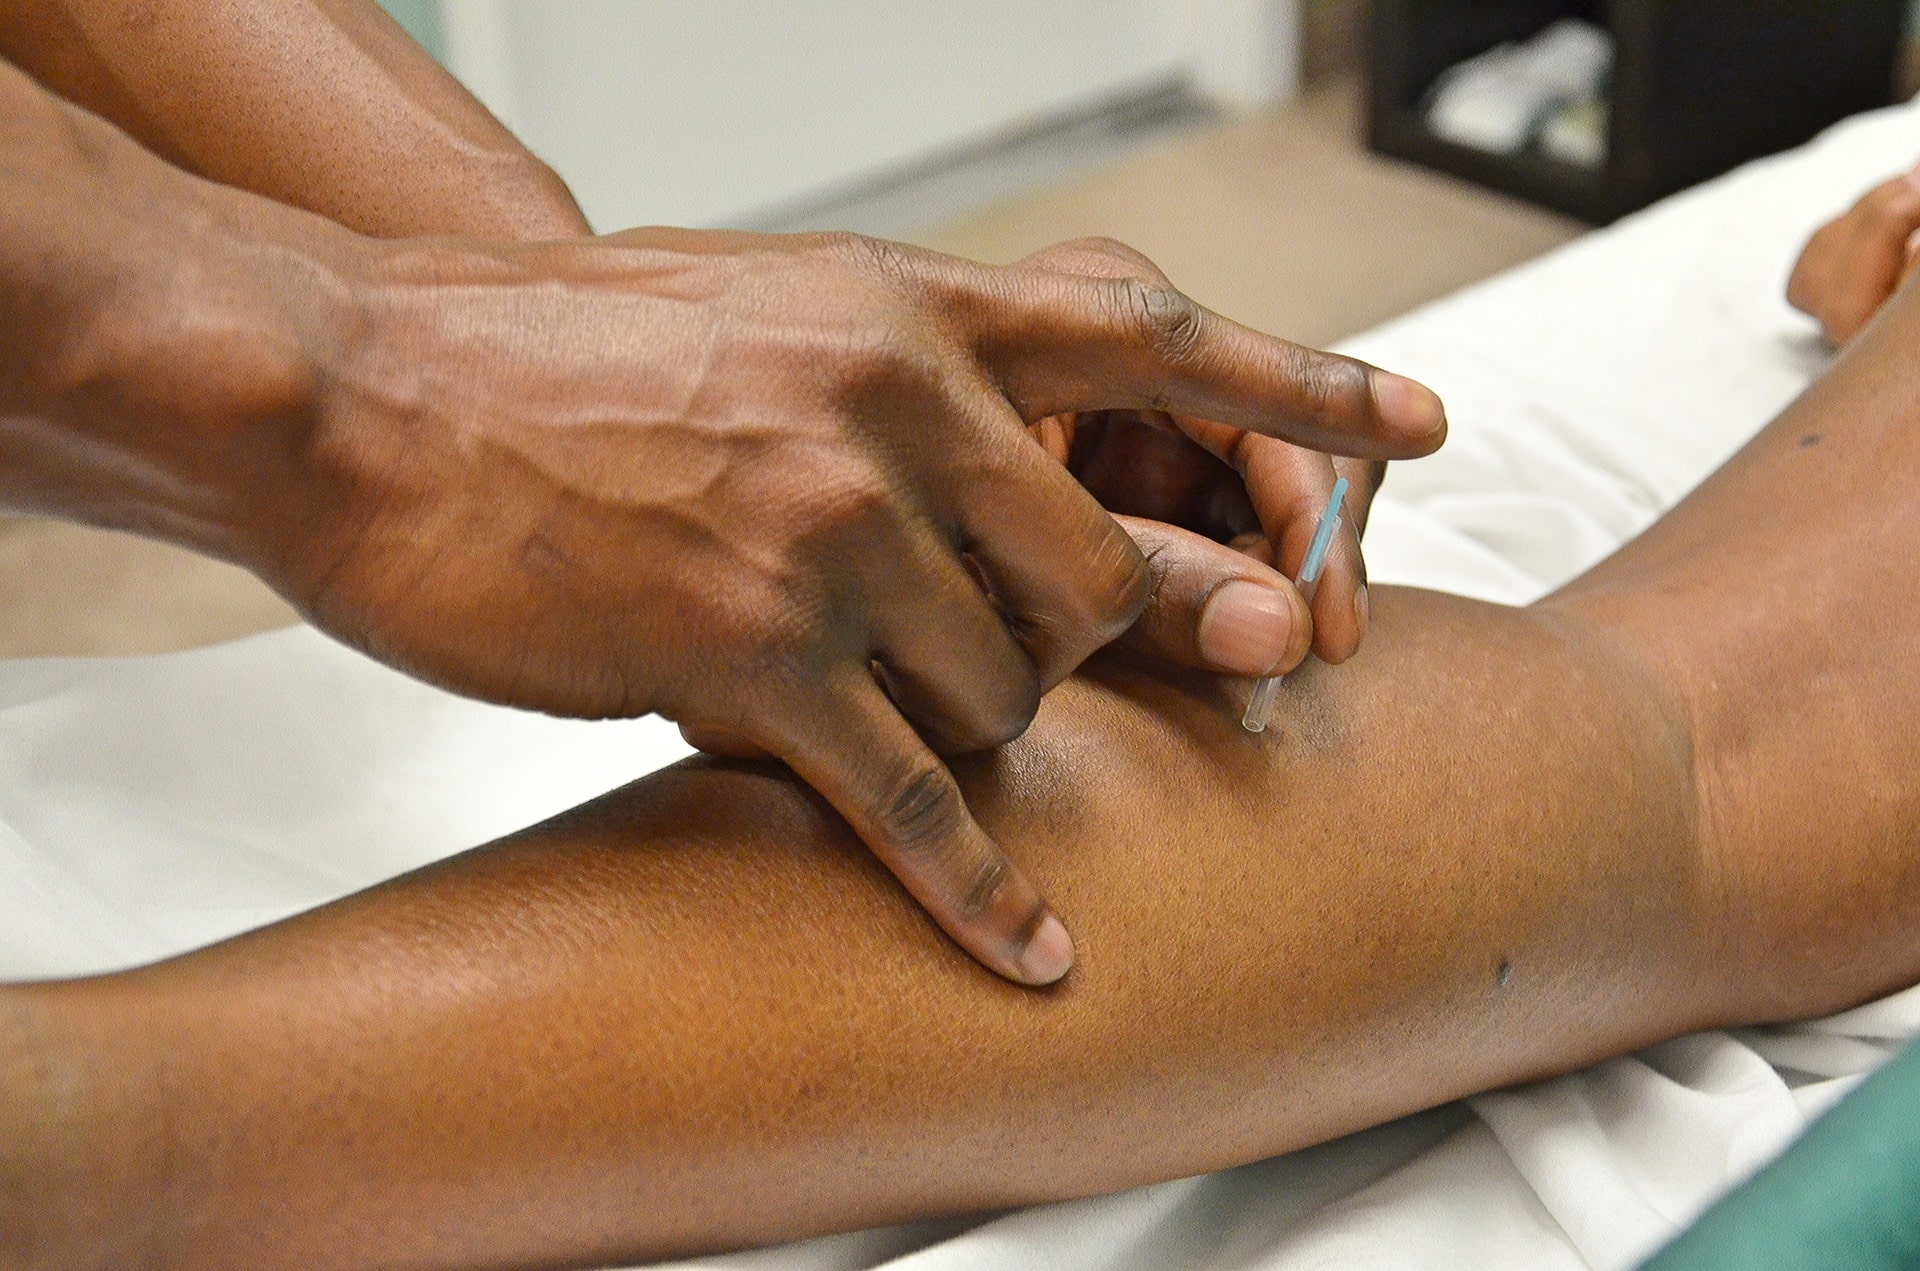 dry needling procedure being done on an arm